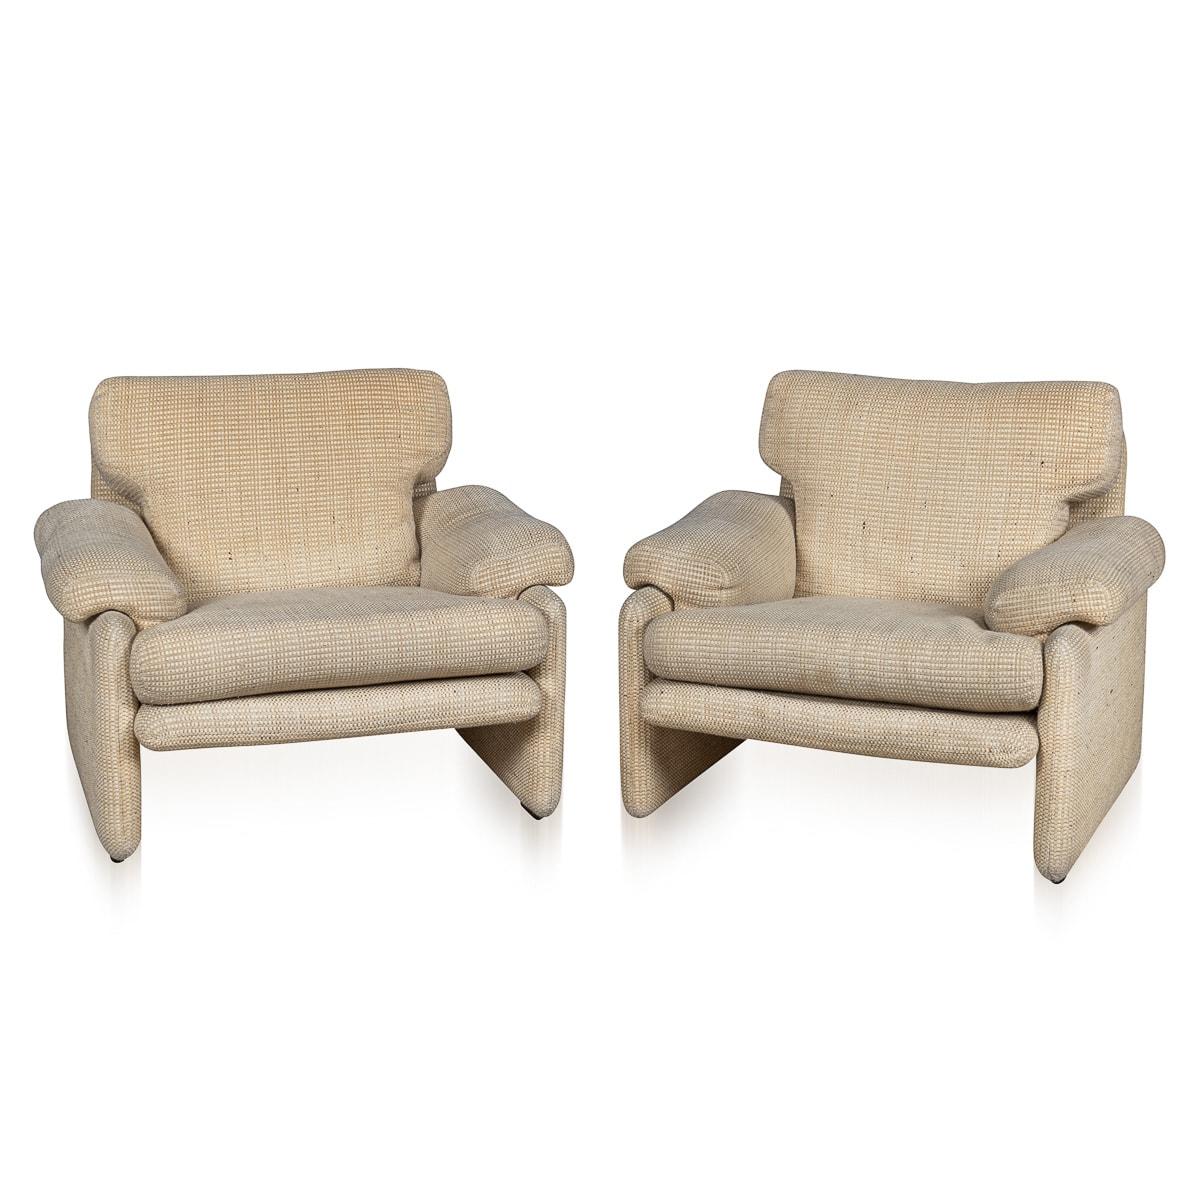 A beautiful pair of “Coronado“ armchairs designed by Tobia Scarpa for B&B Italia, crafted in Italy during the latter part of the 20th century. Embracing a refined aesthetic, these exquisite armchairs are upholstered in a mottled grey fabric that not